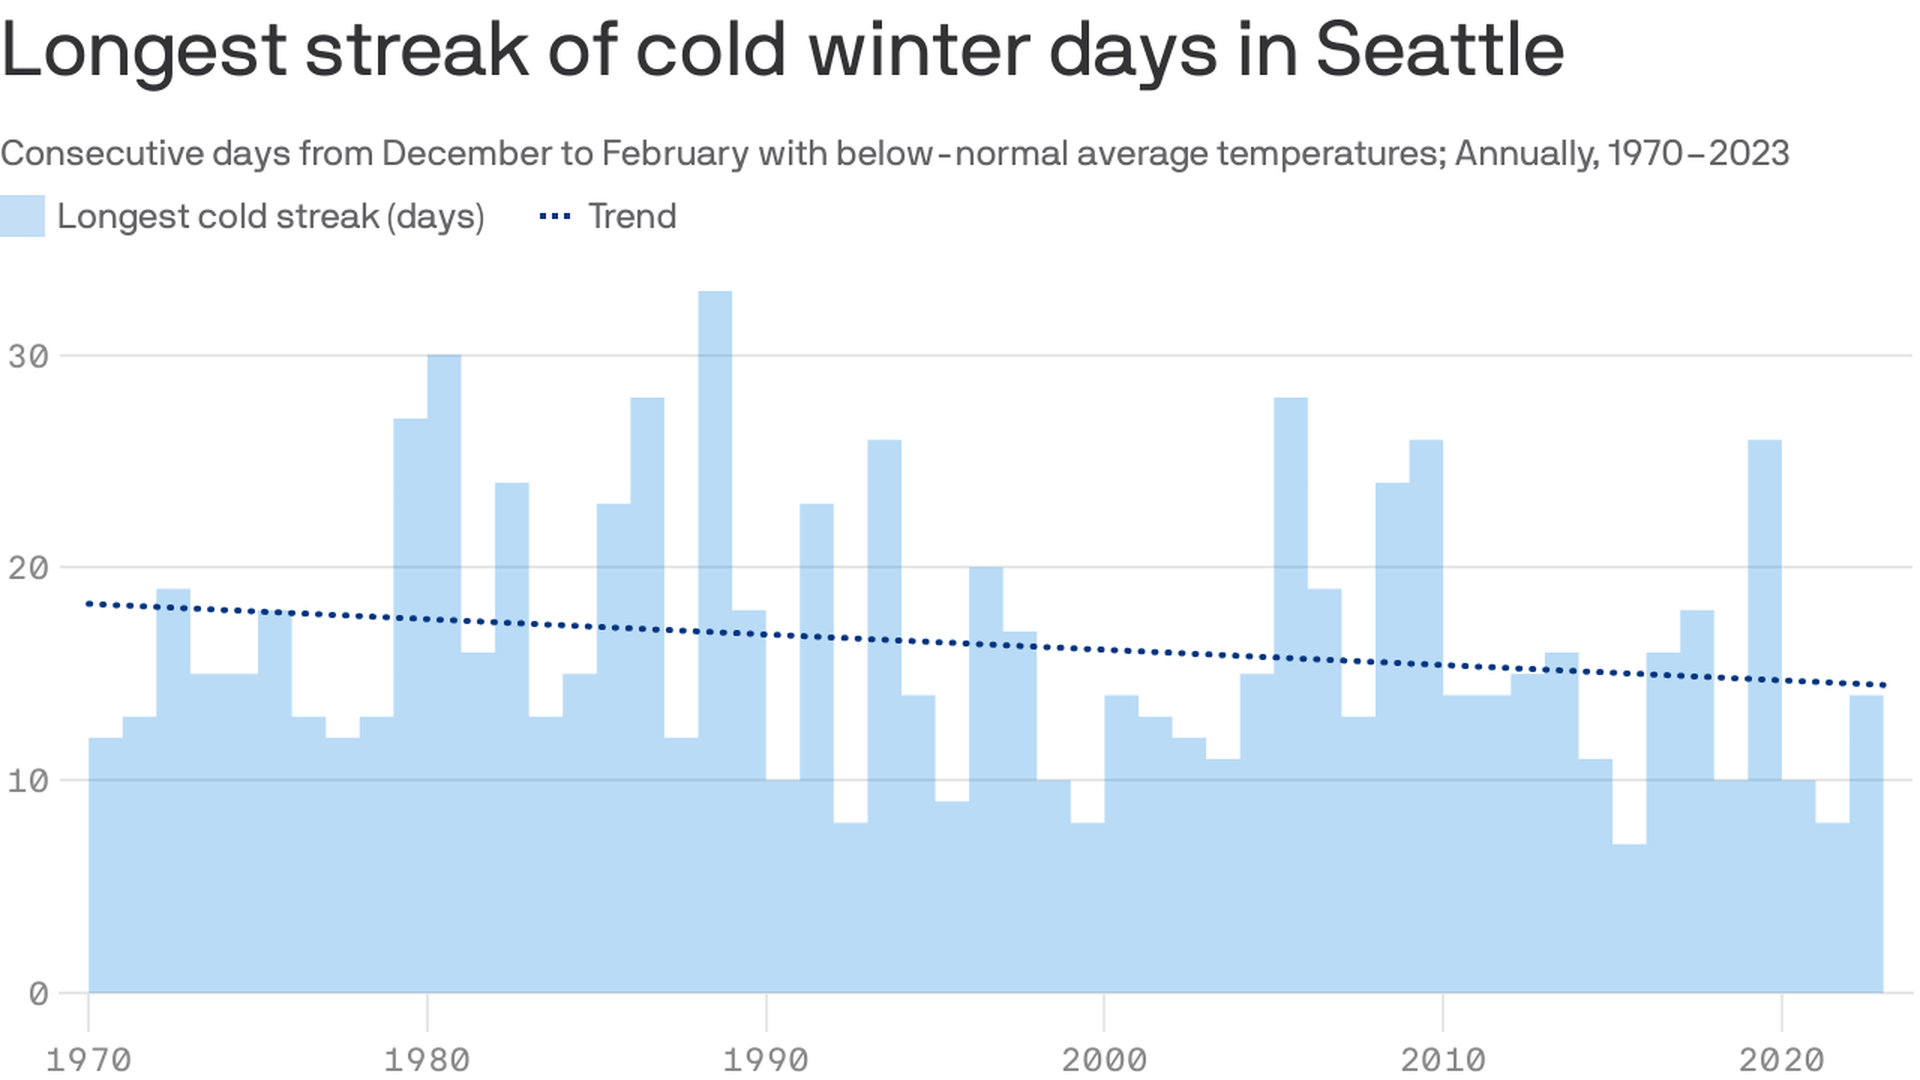 A chart of cold winter days in Seattle with a trend line showing the streaks of such days have gotten shorter since 1970.